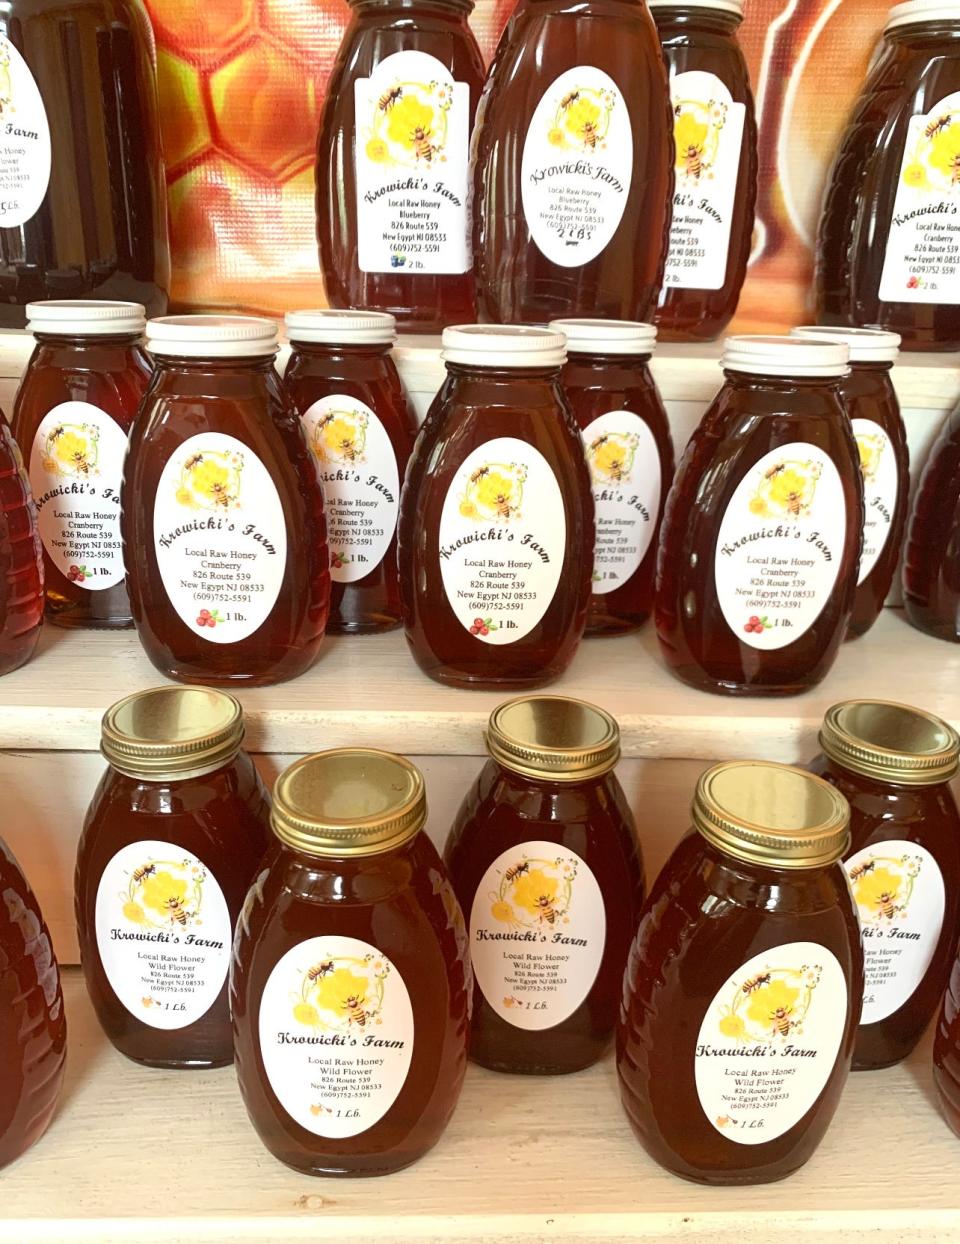 Fresh local honey from Krowicki's Farm Market in the New Egypt section of Plumsted Township.